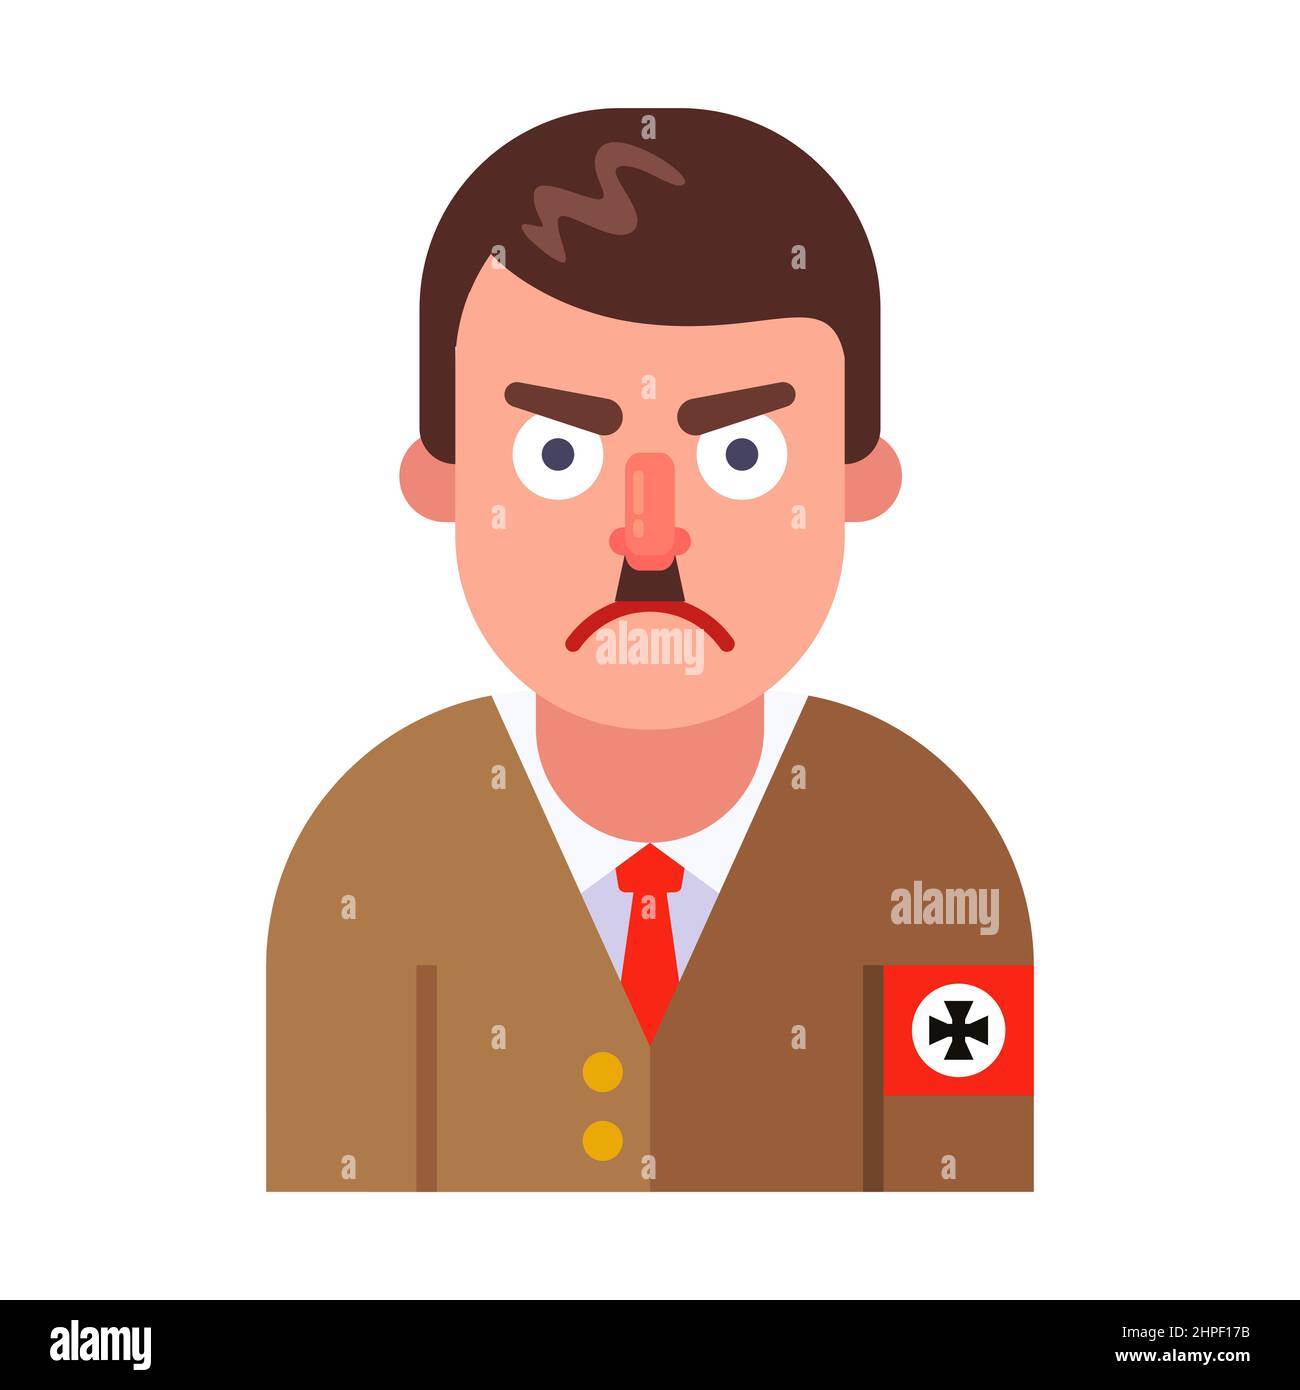 adolf hitler a nazi. dictator character in germany. flat vector illustration. Stock Vector